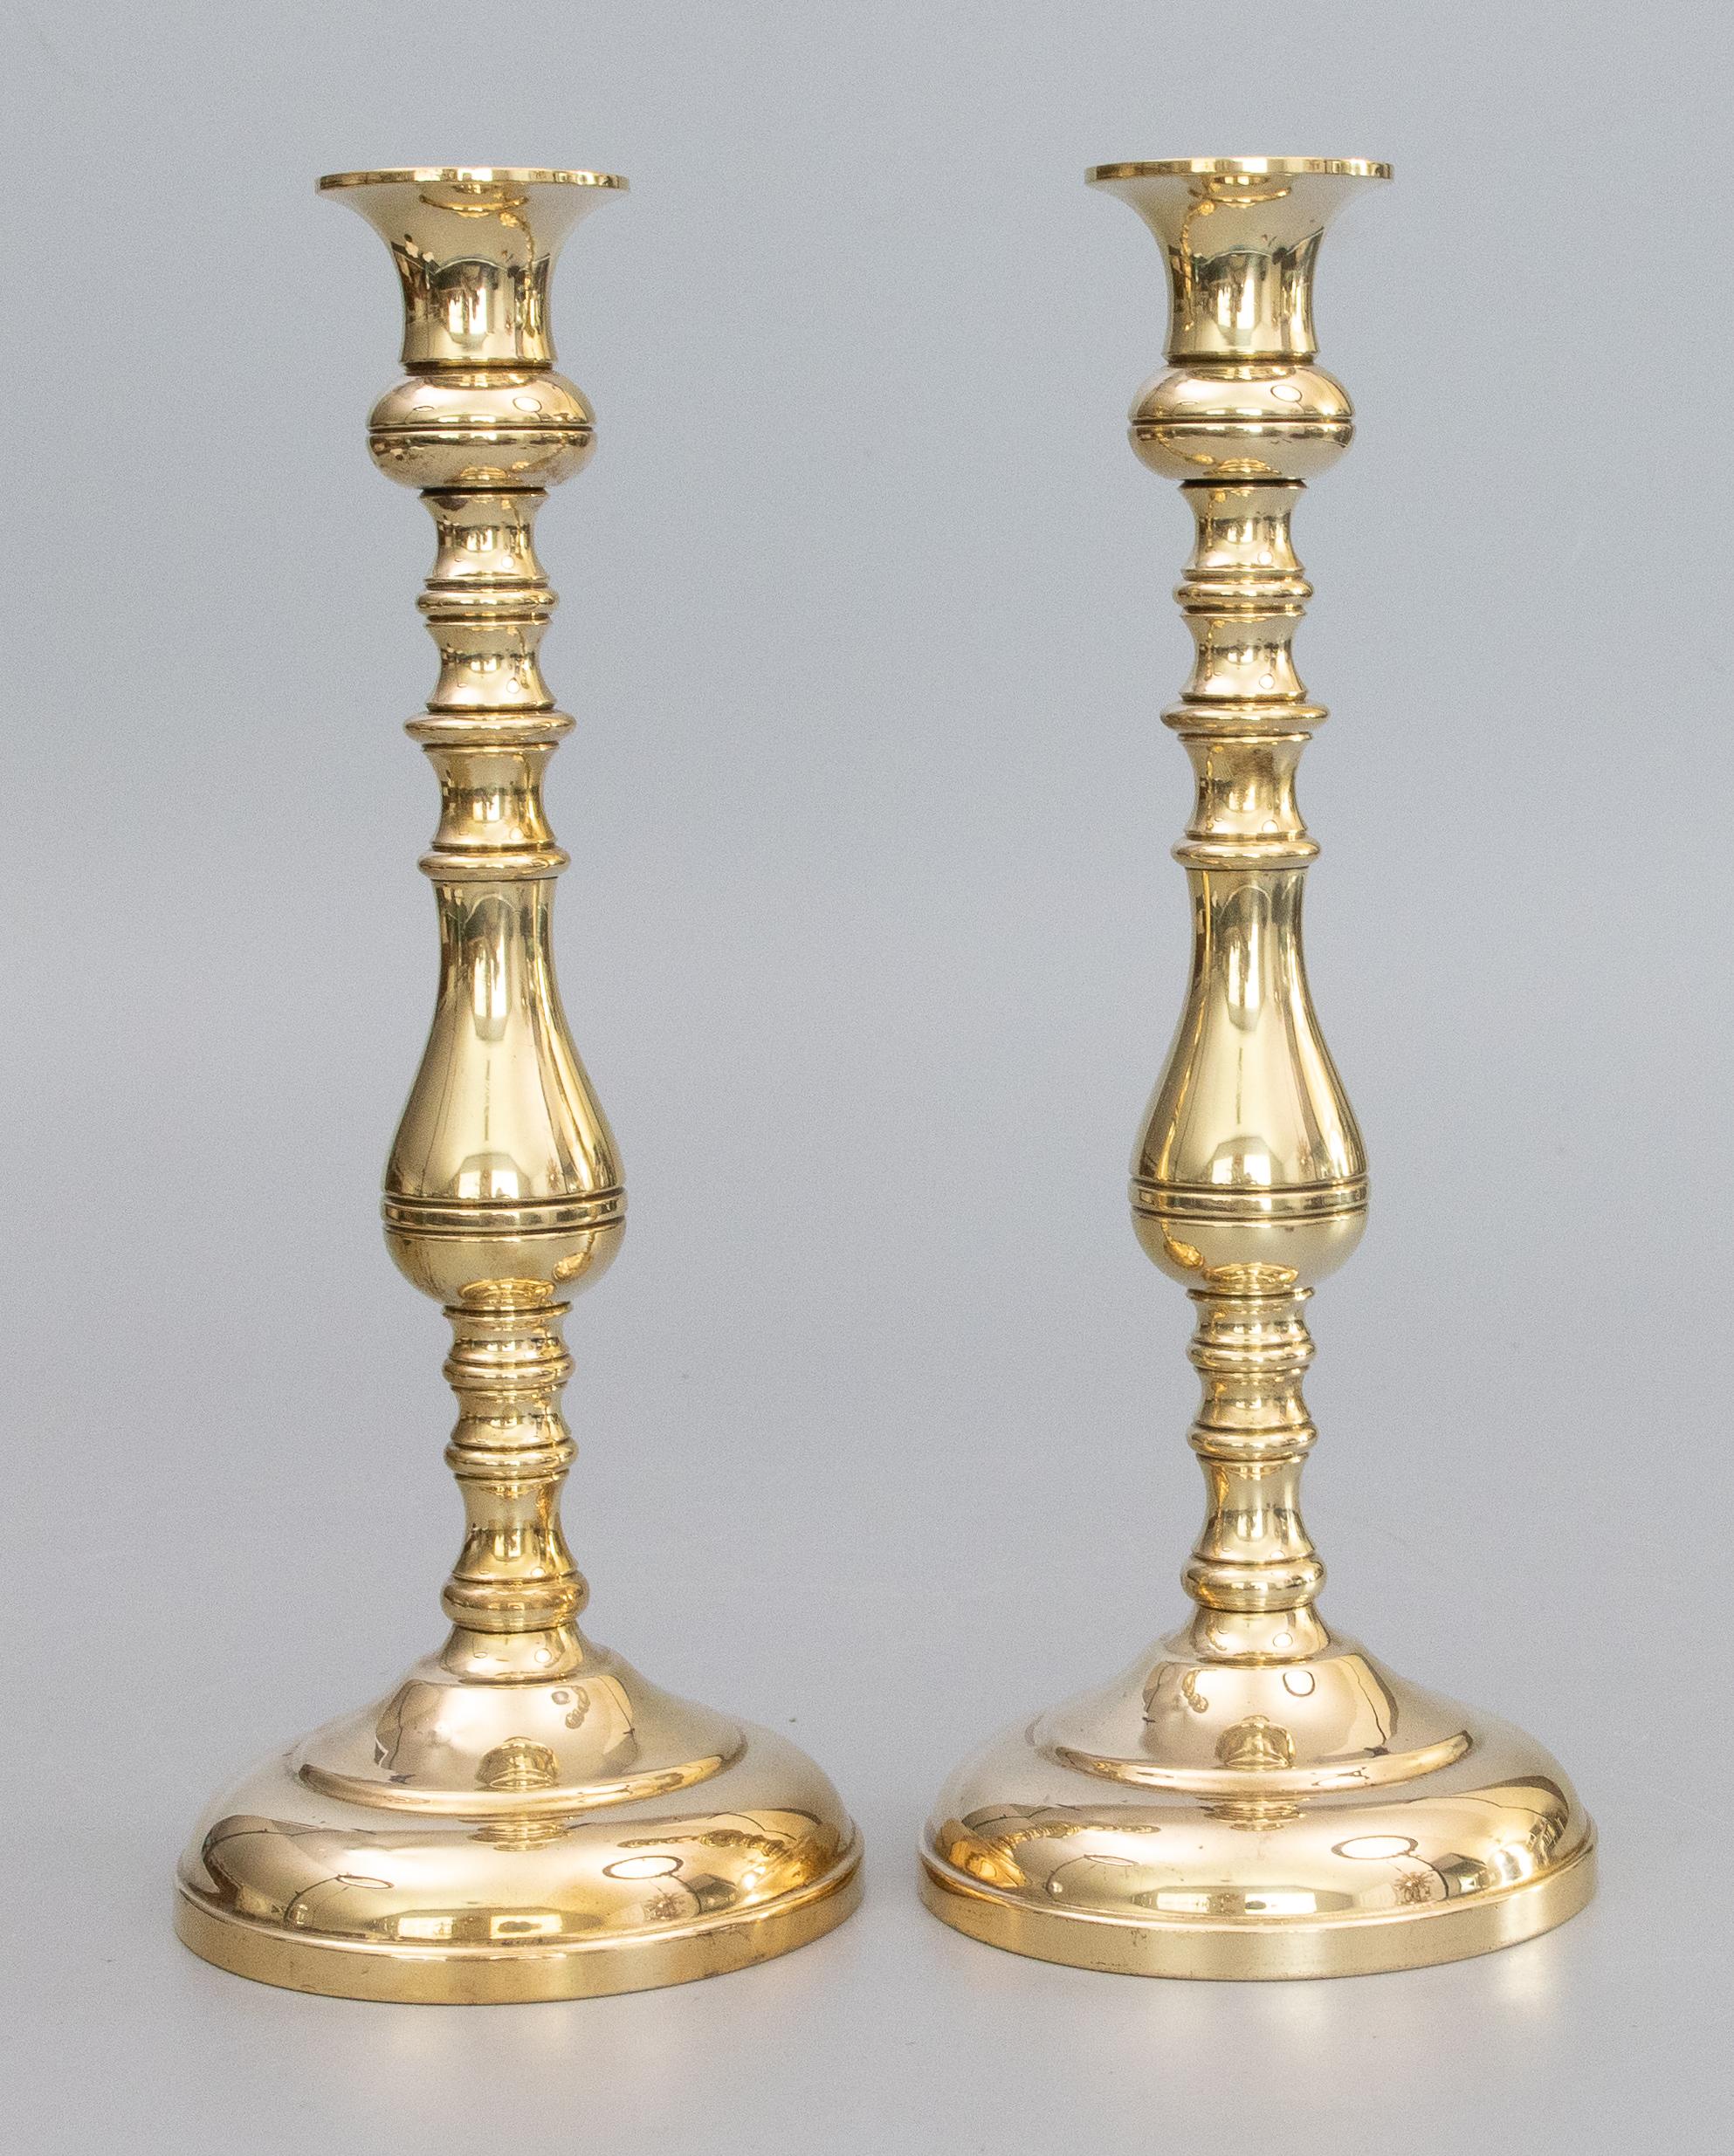 Pair of 19th Century English Queen Anne Style Polished Brass Candlesticks For Sale 3